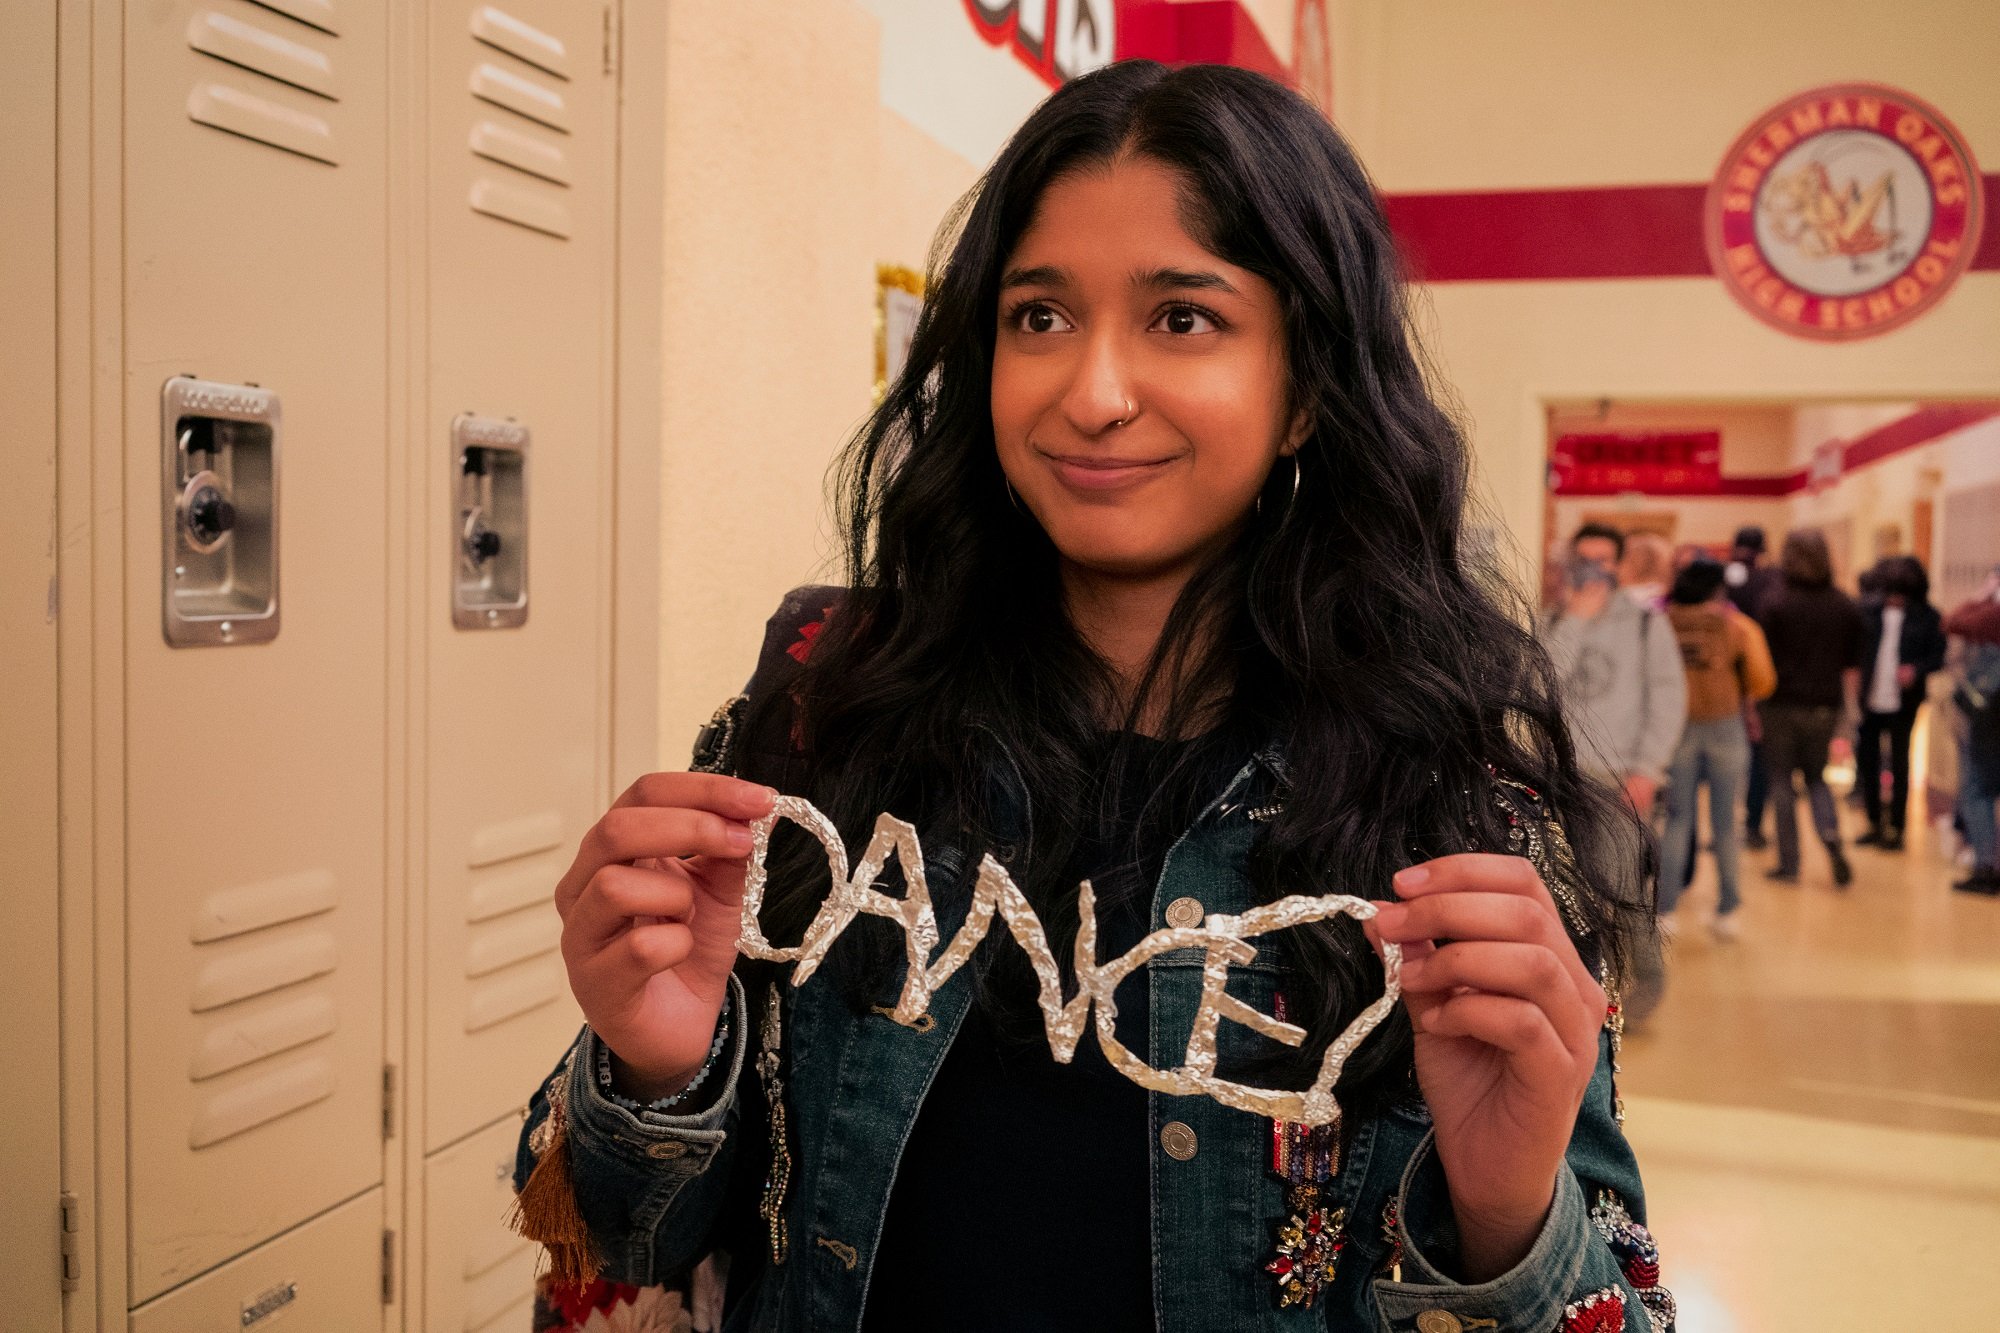 Devi holds up a homemade sign that spells 'Dance?' in 'Never Have I Ever'